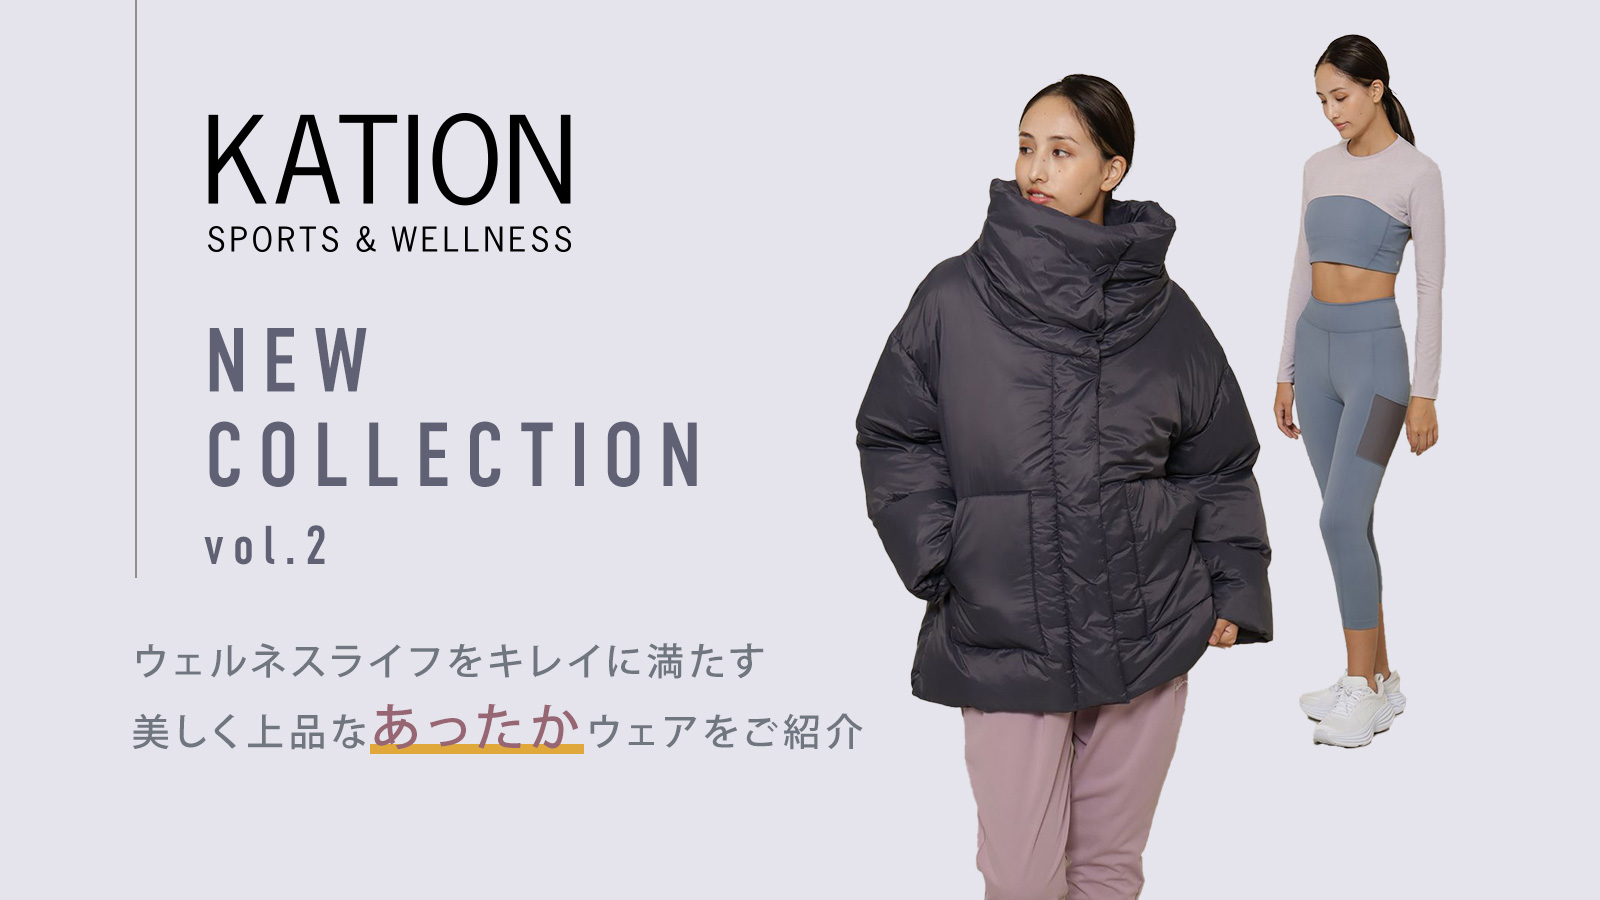 KATION SPORTS & WELLNESS COLLECTION vol.2